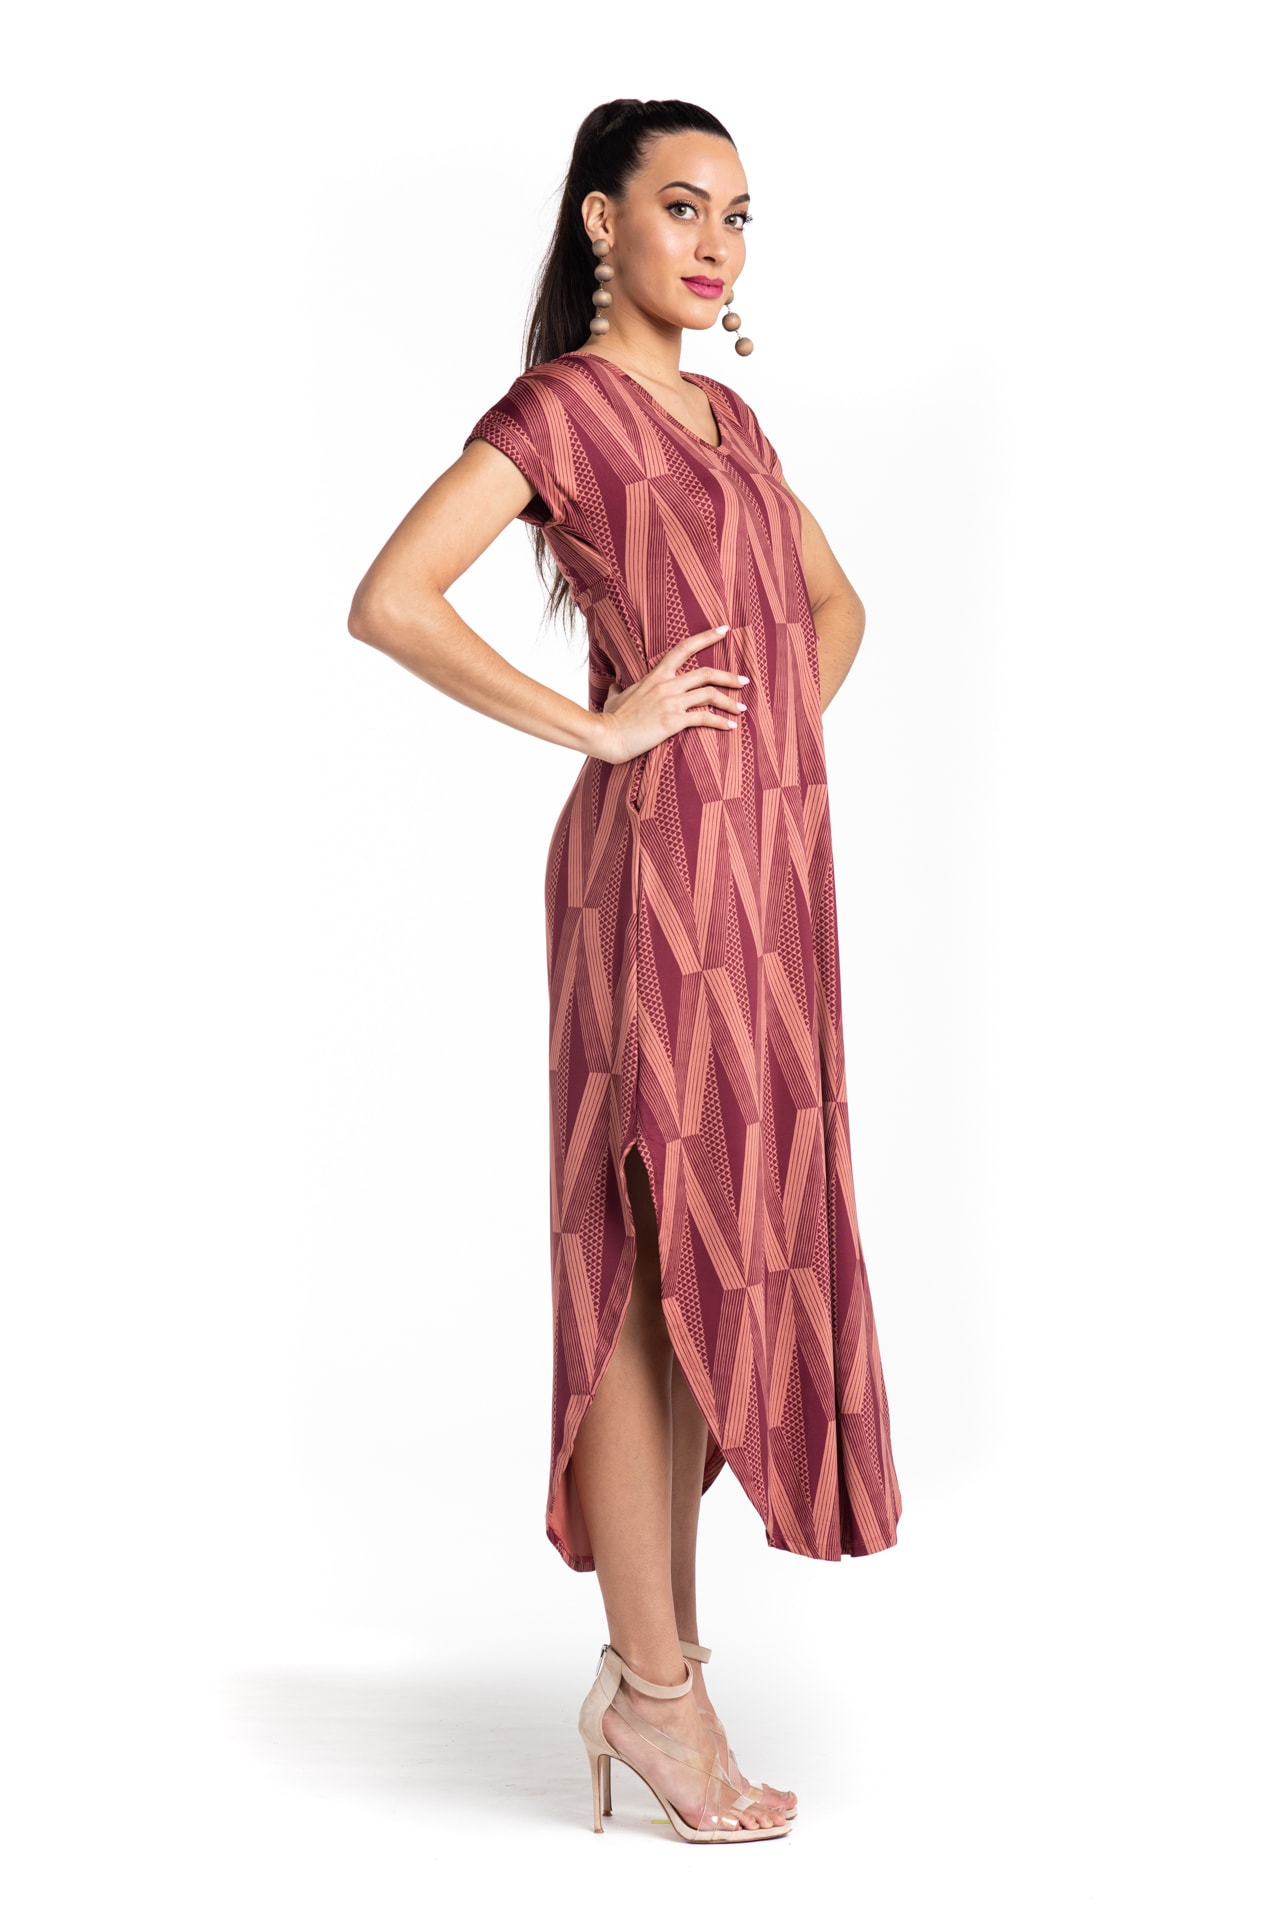 Model wearing Mahalo Nui Dress in Copper - Side View